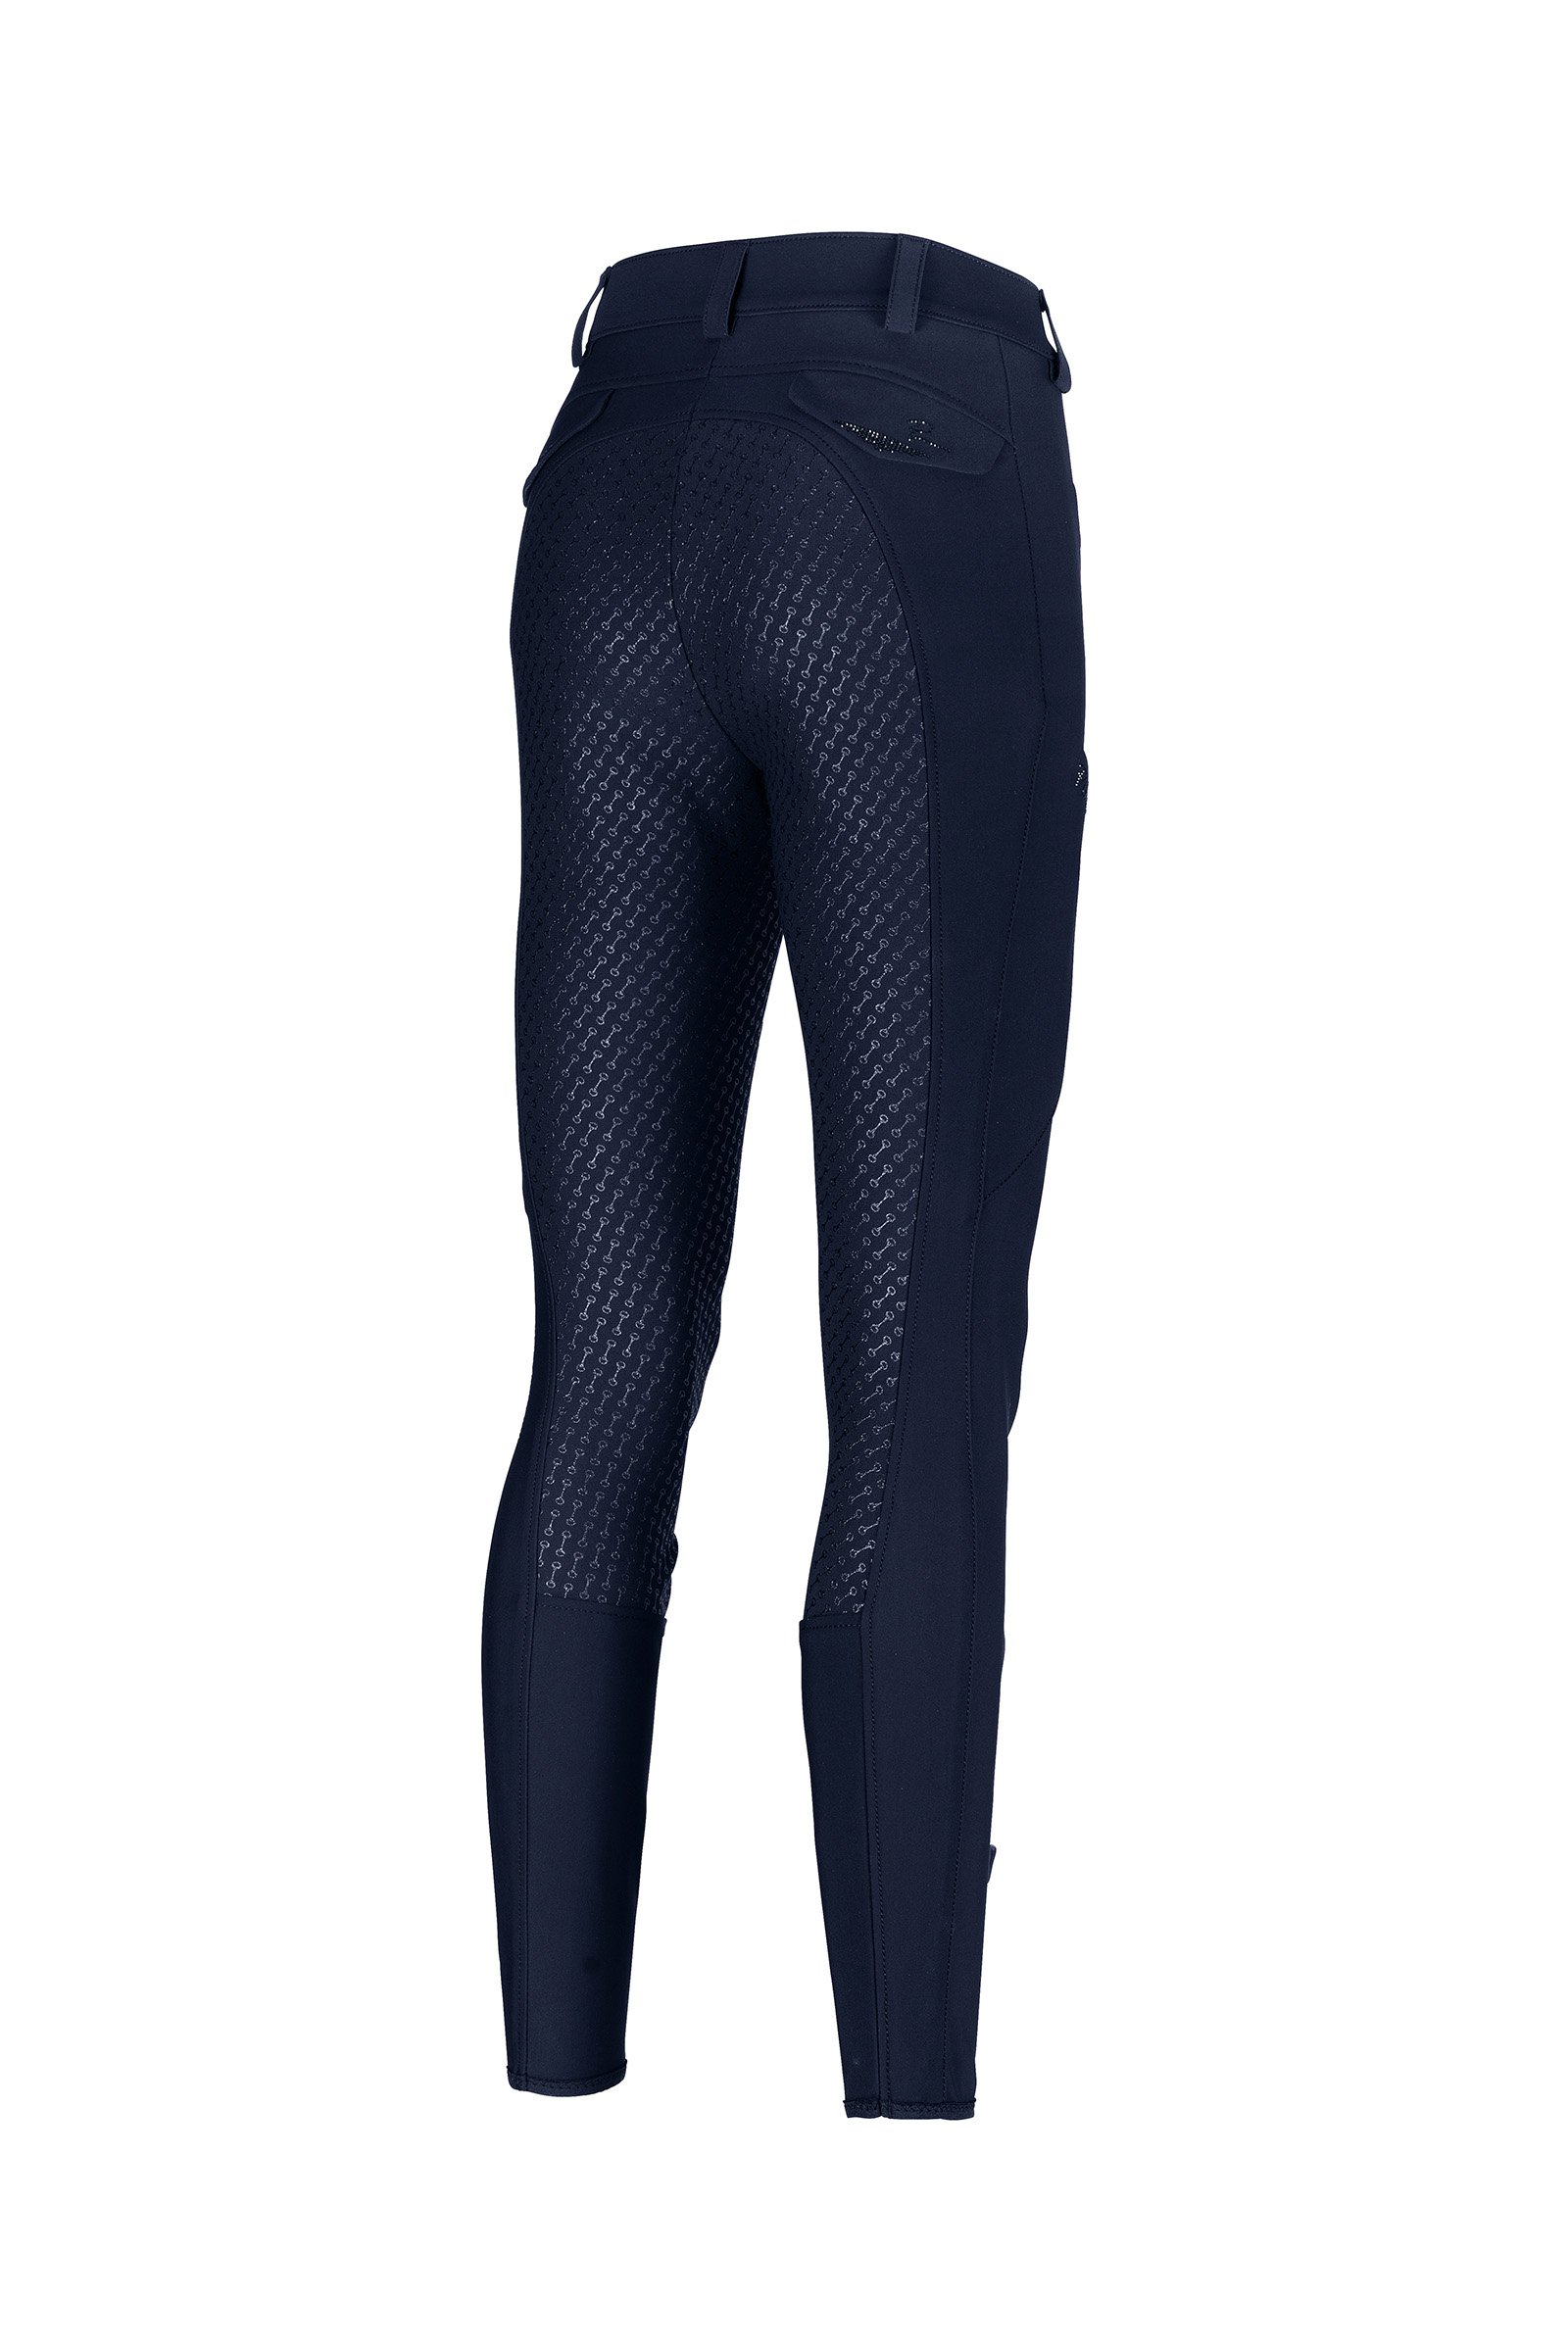 Tommy Hilfiger Full seat smart riding leggings in black – Matchy Dressage